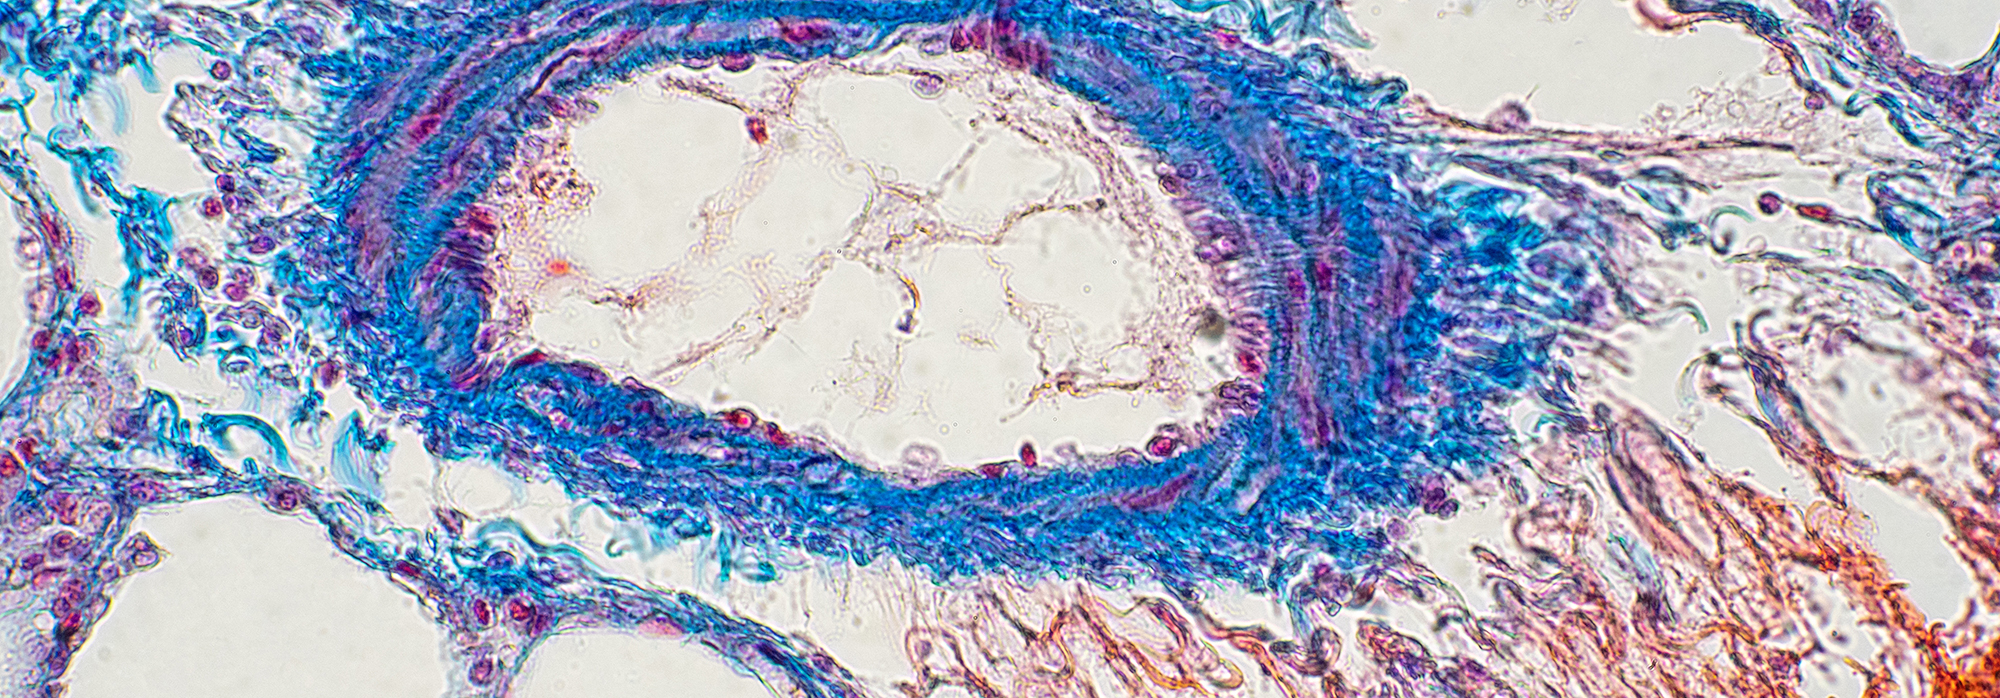 Lung Tissue main page